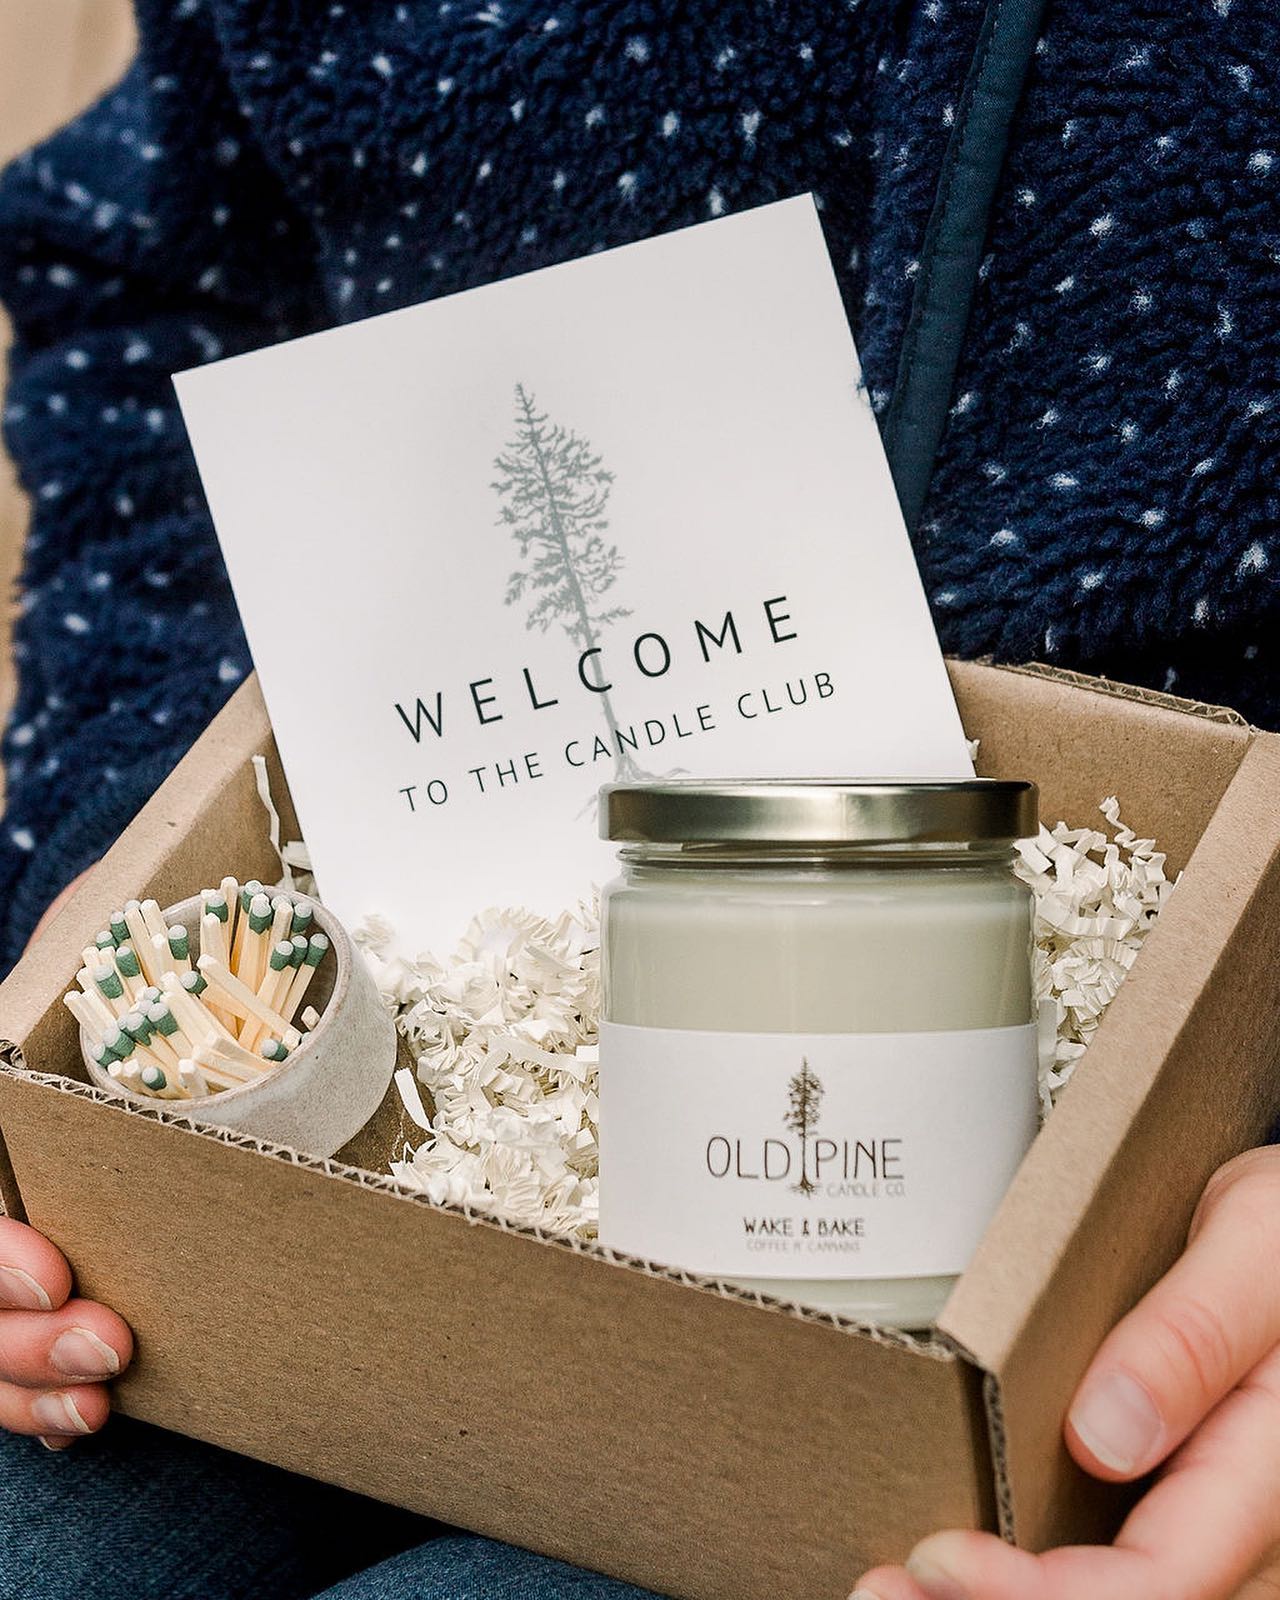 image of gift set from old pine candle company